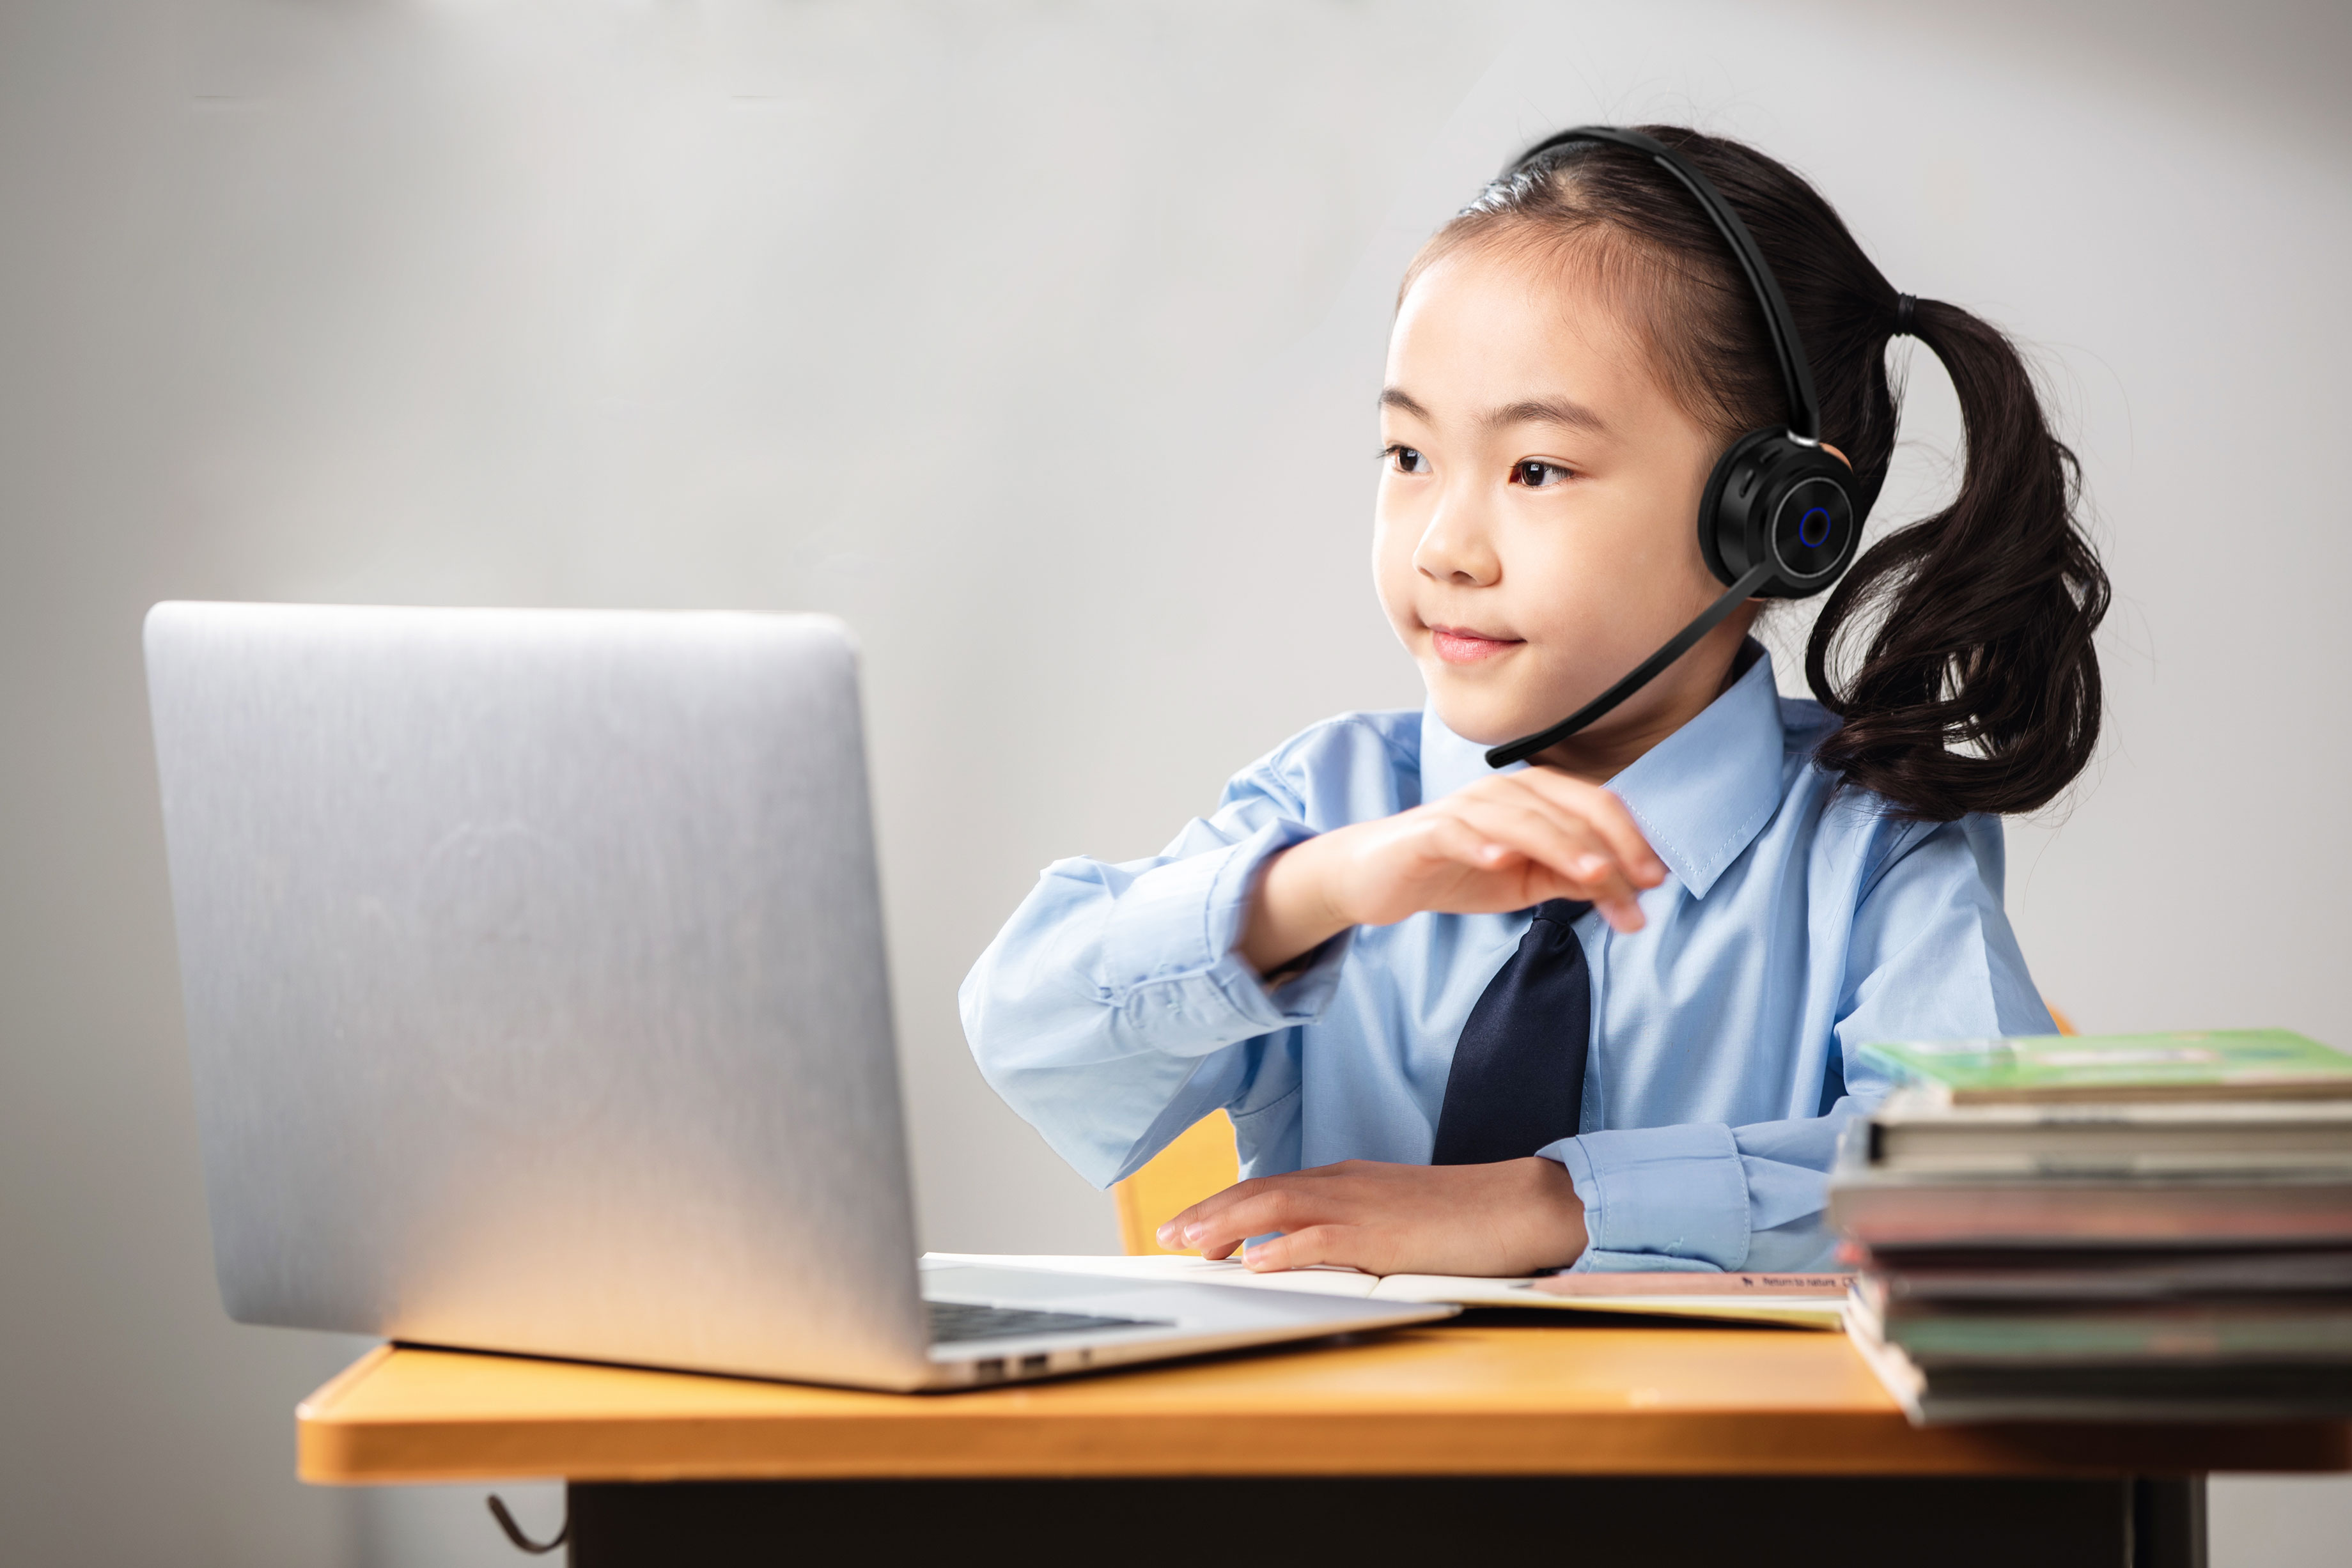 What factors should be considered when selecting an appropriate headset for an online course?